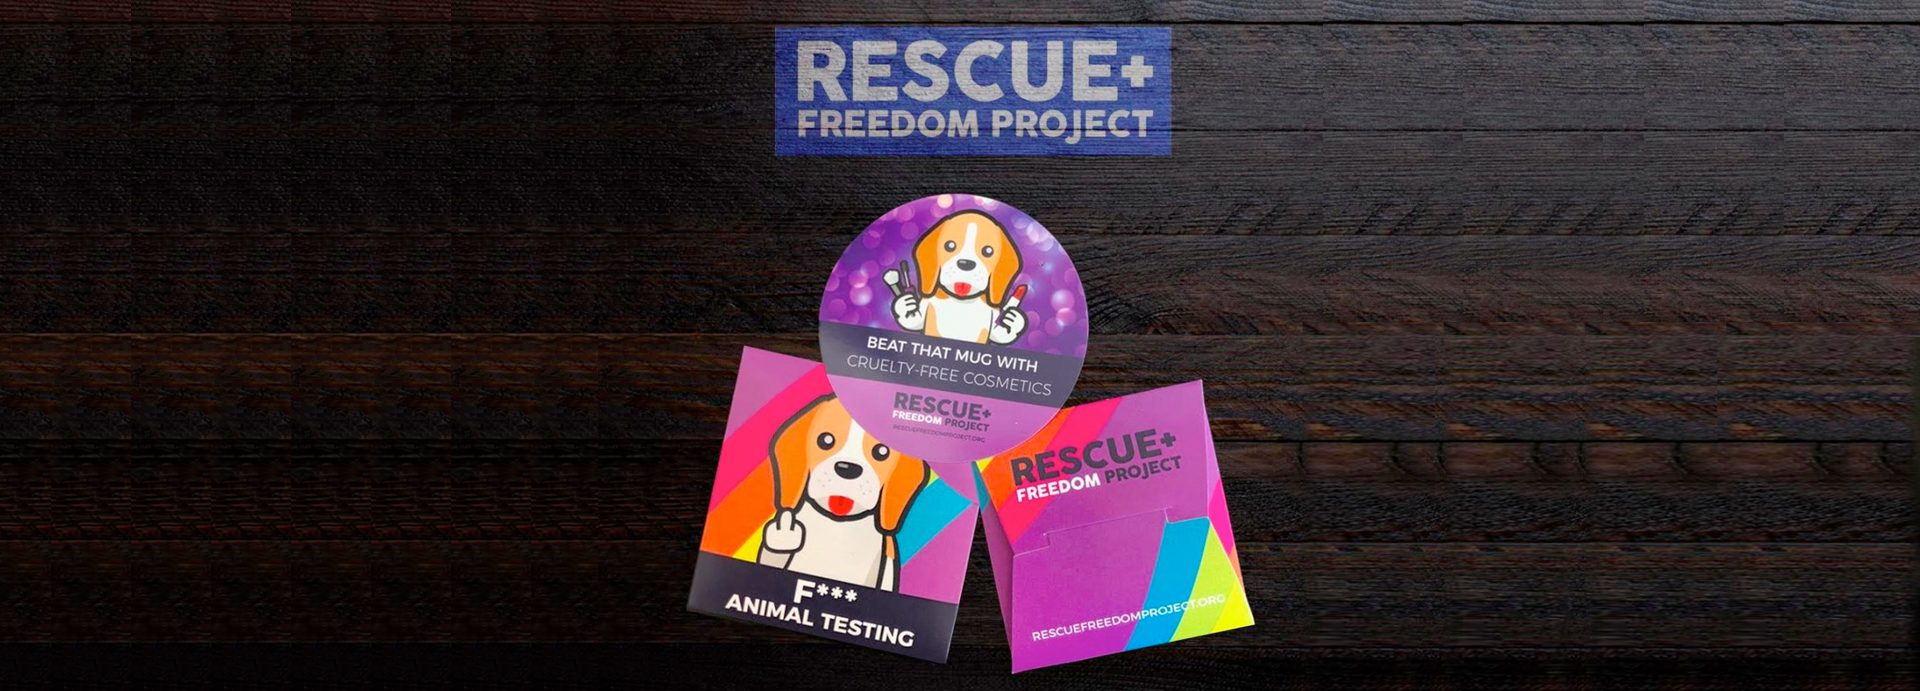 Condoms, Cosmetics & Cruelty: Putting an End to Animal Testing with Beagle Freedom Project